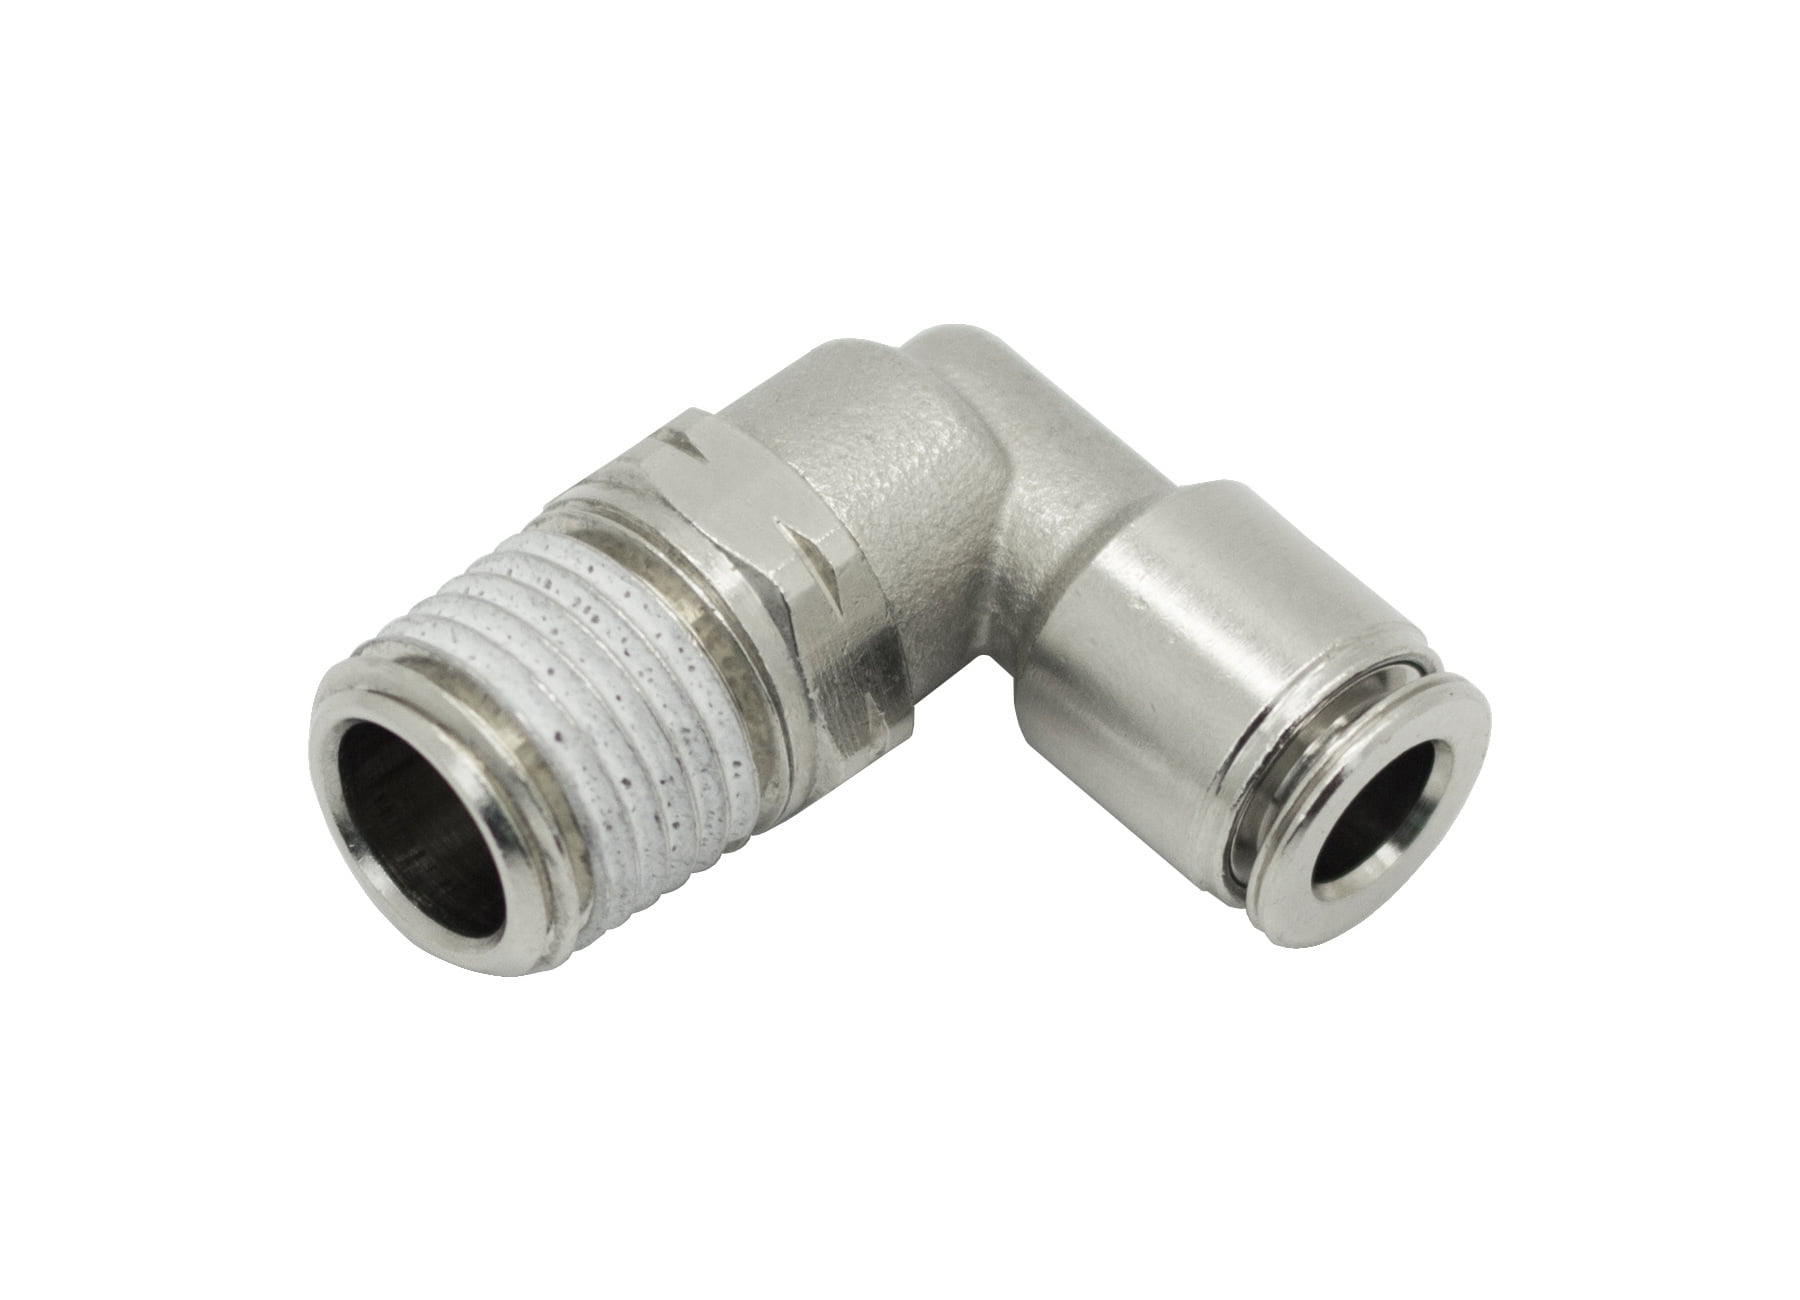 Pack of 5 Male Elbow PneumaticPlus PN15 Series Push to Connect Tube Fitting 3//8 Tube X 1//4 NPT